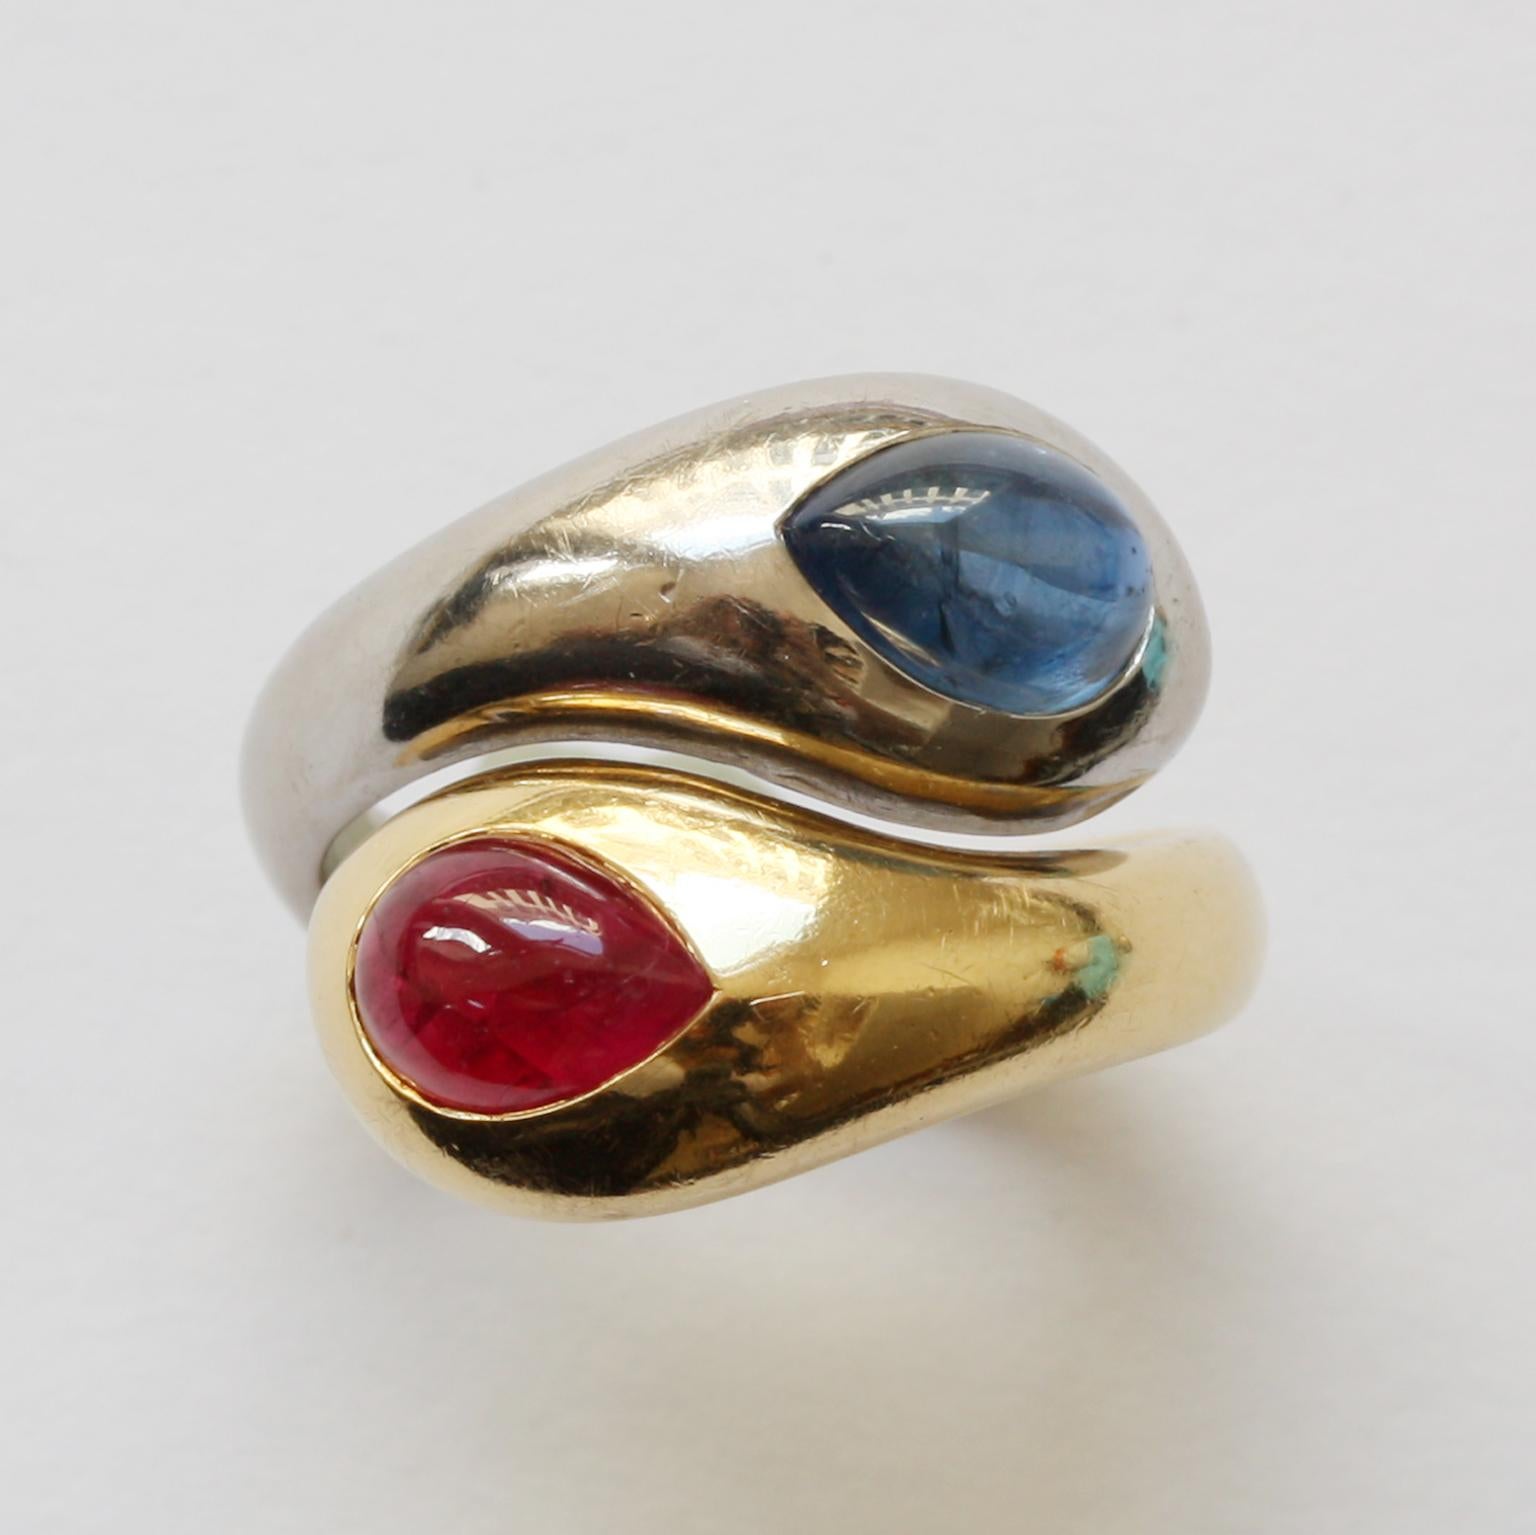 A bi-color 18 carat gold snake ring, half yellow gold with a drop cabochon cut ruby in its head (1.5 karaat) and half white gold with a drop cobochon cut ruby (2.74 carat), by Hemmerle, from München, circa 1980, with its original pouch and